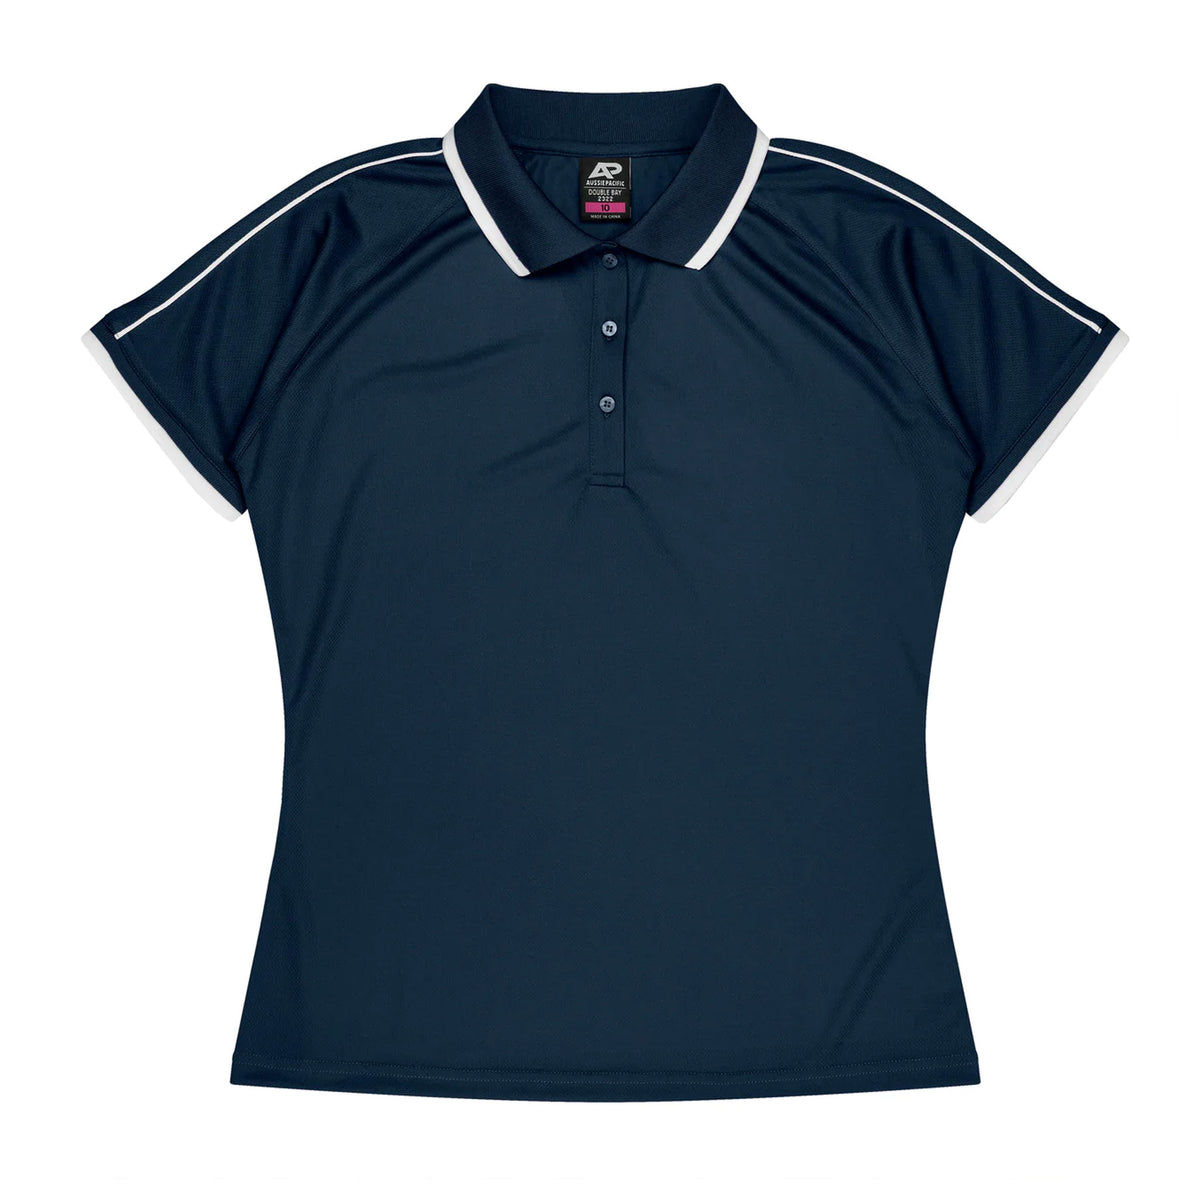 aussie pacific double bay ladies polo in navy white